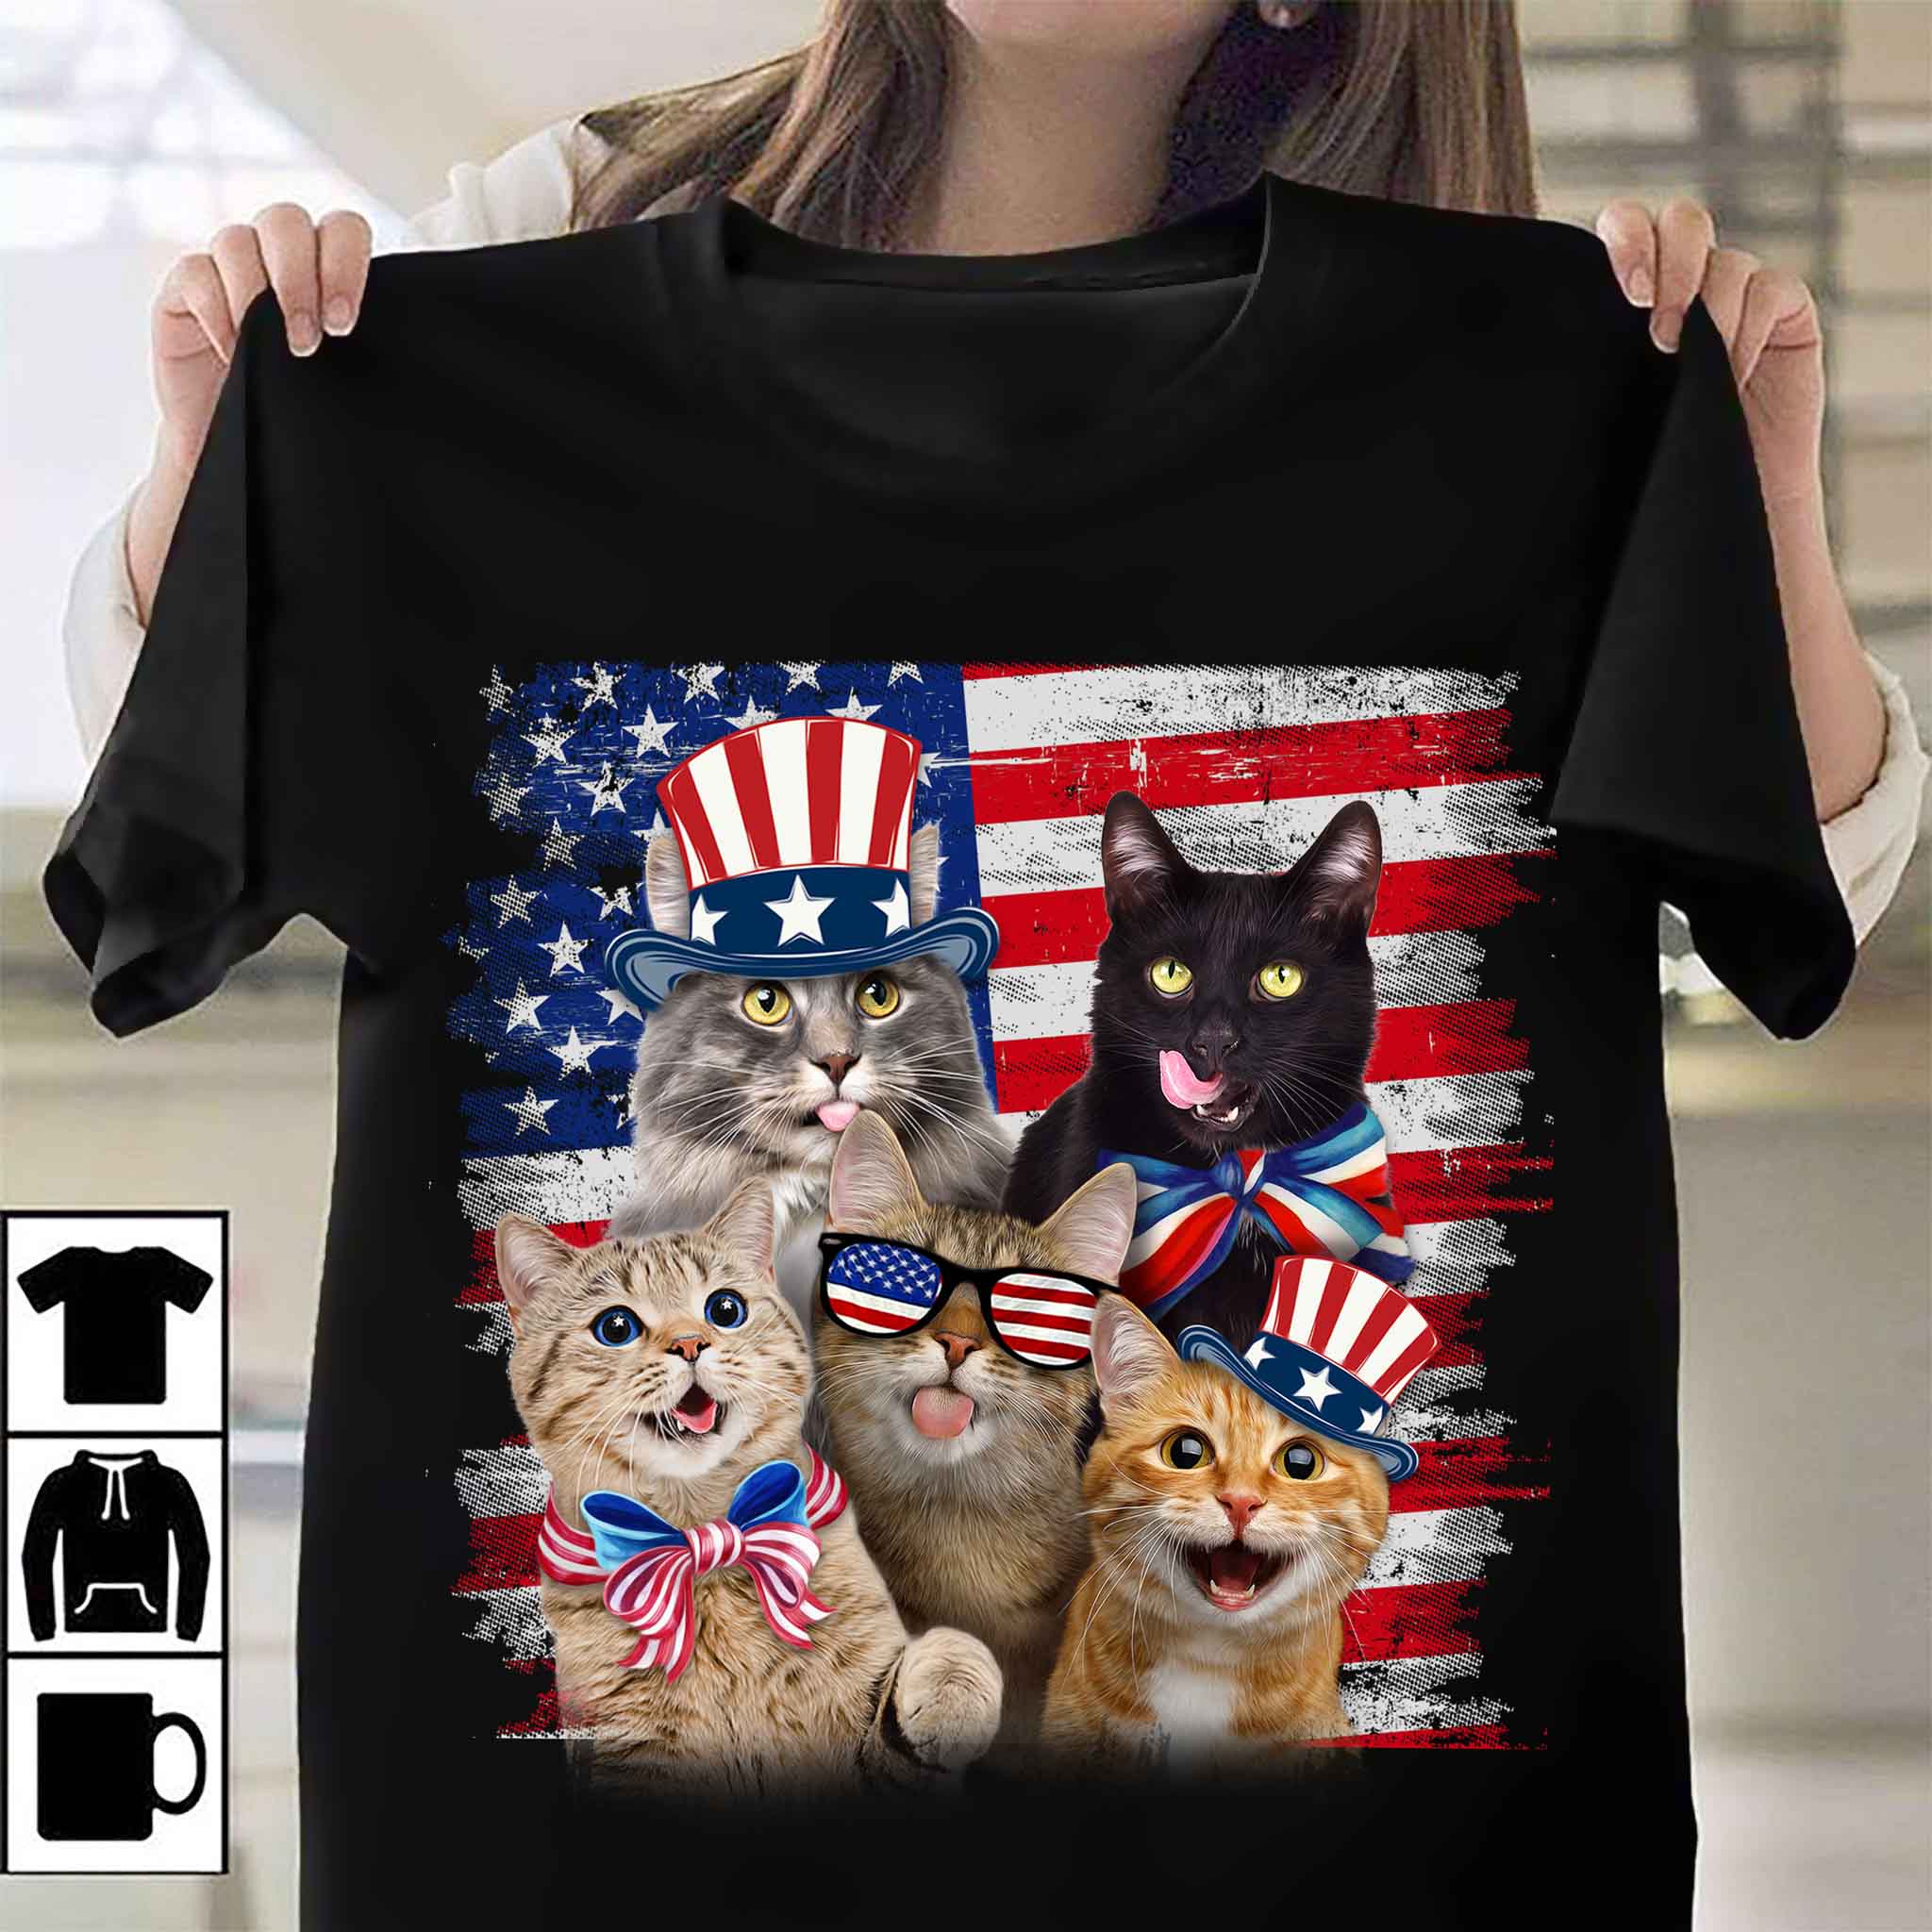 Cat family, cat lover - America flag, independence day